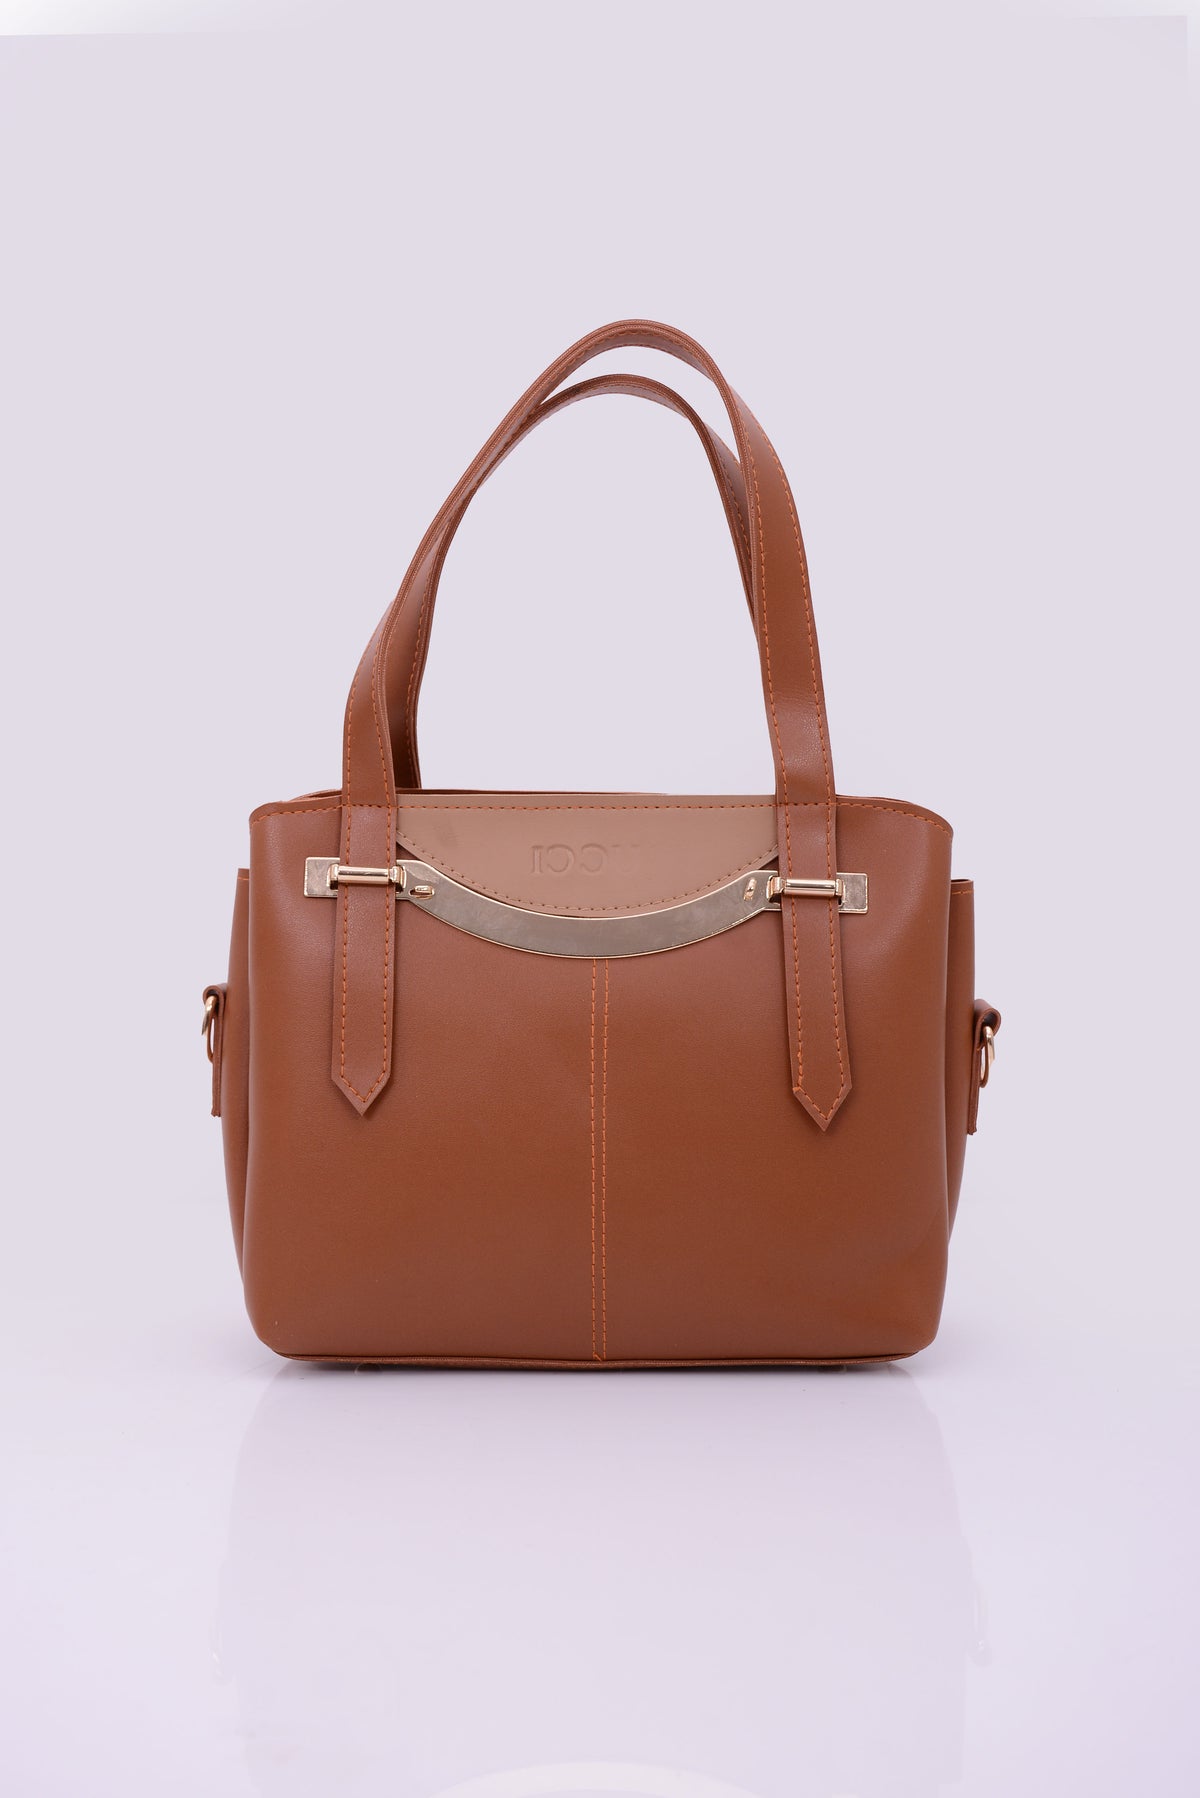 Hand Bags for Women |Ladies Purse Y10-31